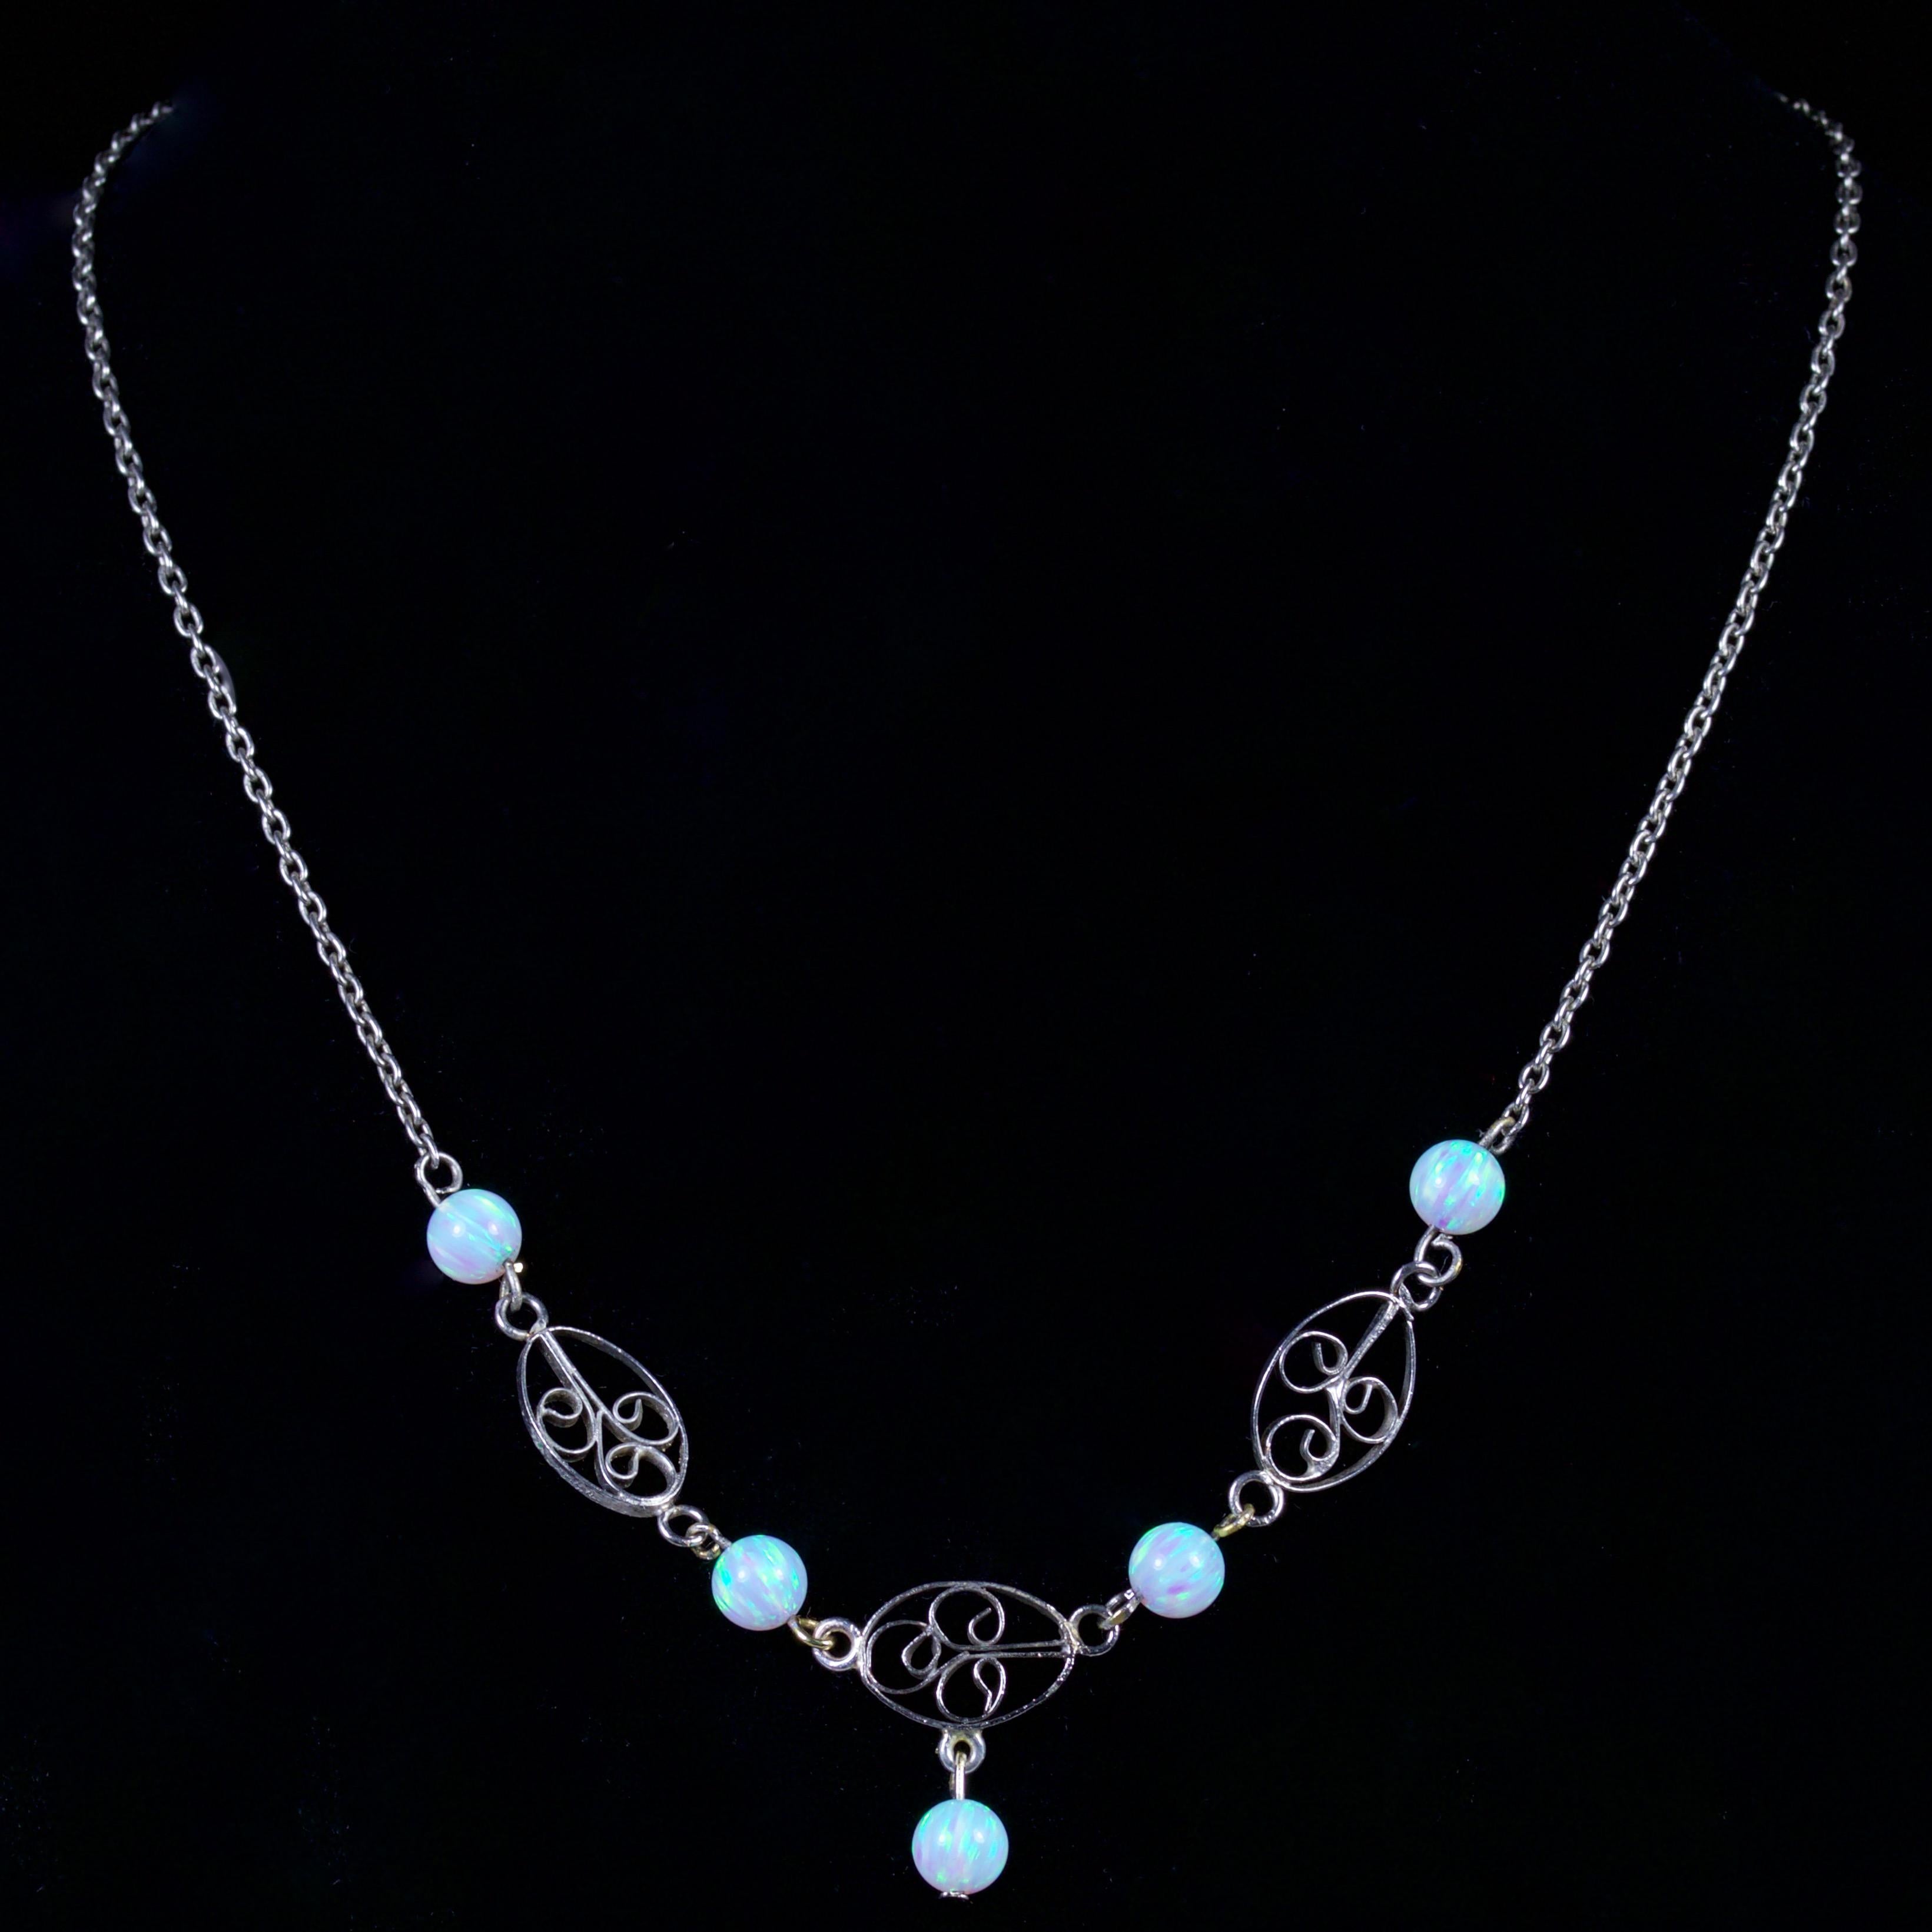 This elegant Victorian Sterling Silver necklace is, Circa 1900.

The necklace 4 cultured Opal set into a fancy Silver gallery, that leads down to another cultured Opal dropper.

Each cultured Opal is 0.75ct

Cultured Opals radiate a myriad of